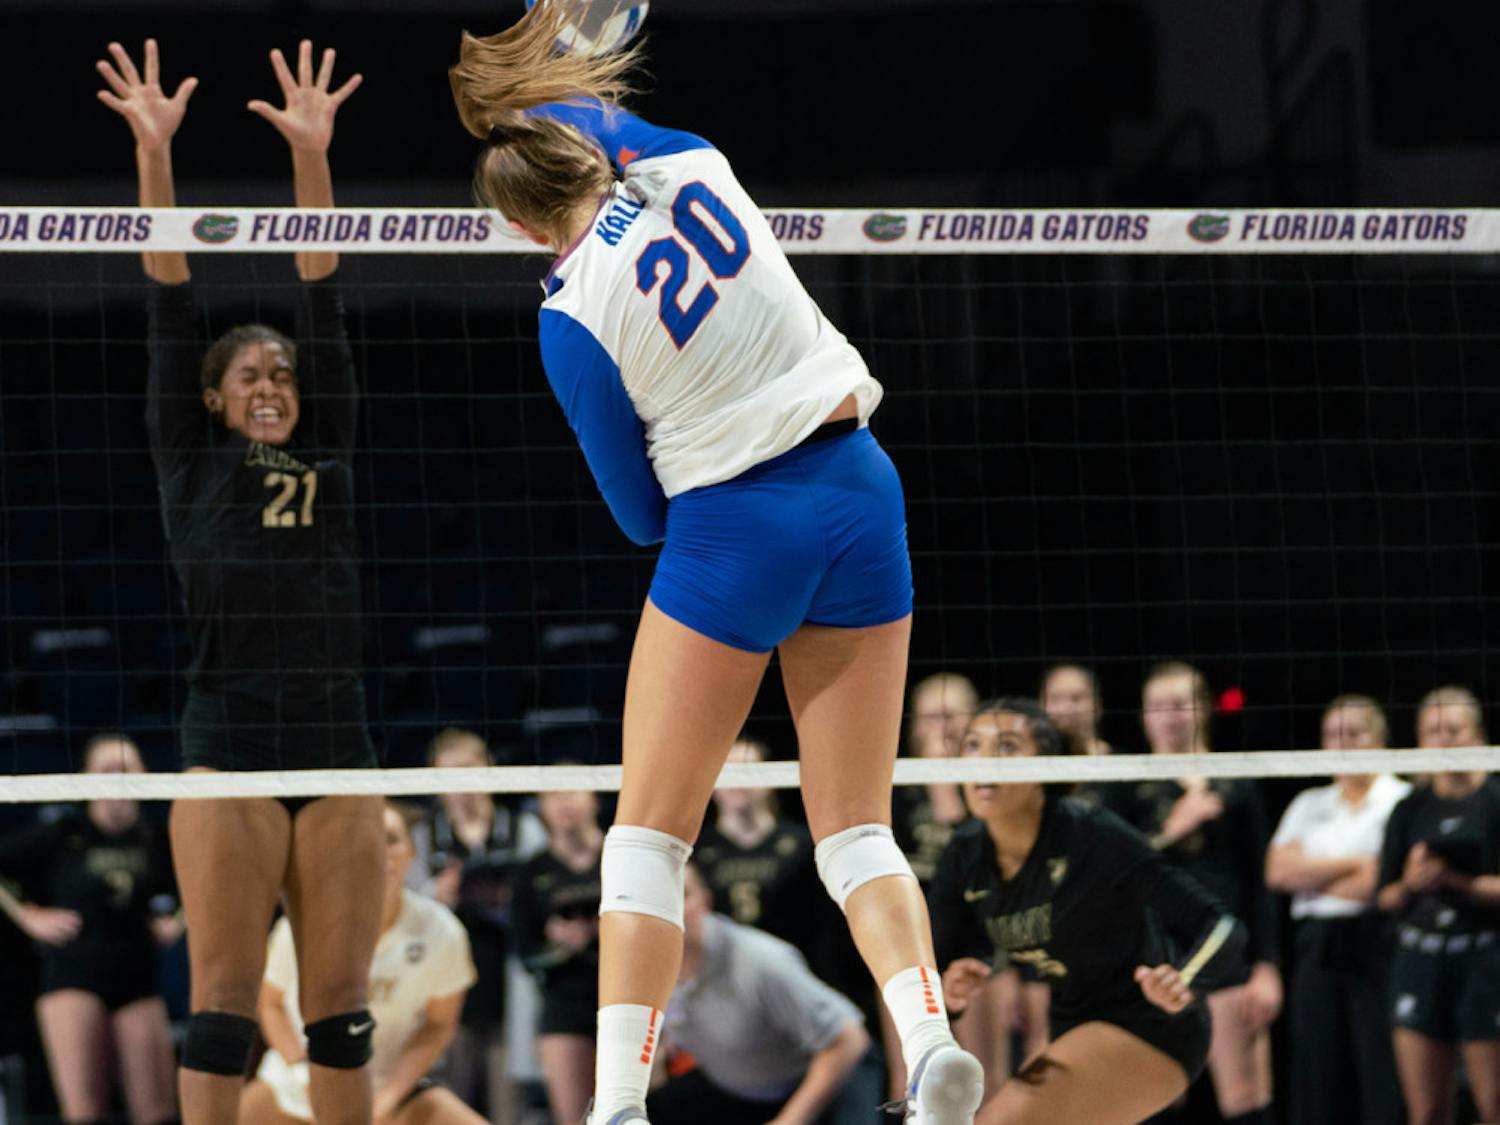 Freshman Thayer Hall leads Florida with 168 kills and 11 service aces this season.